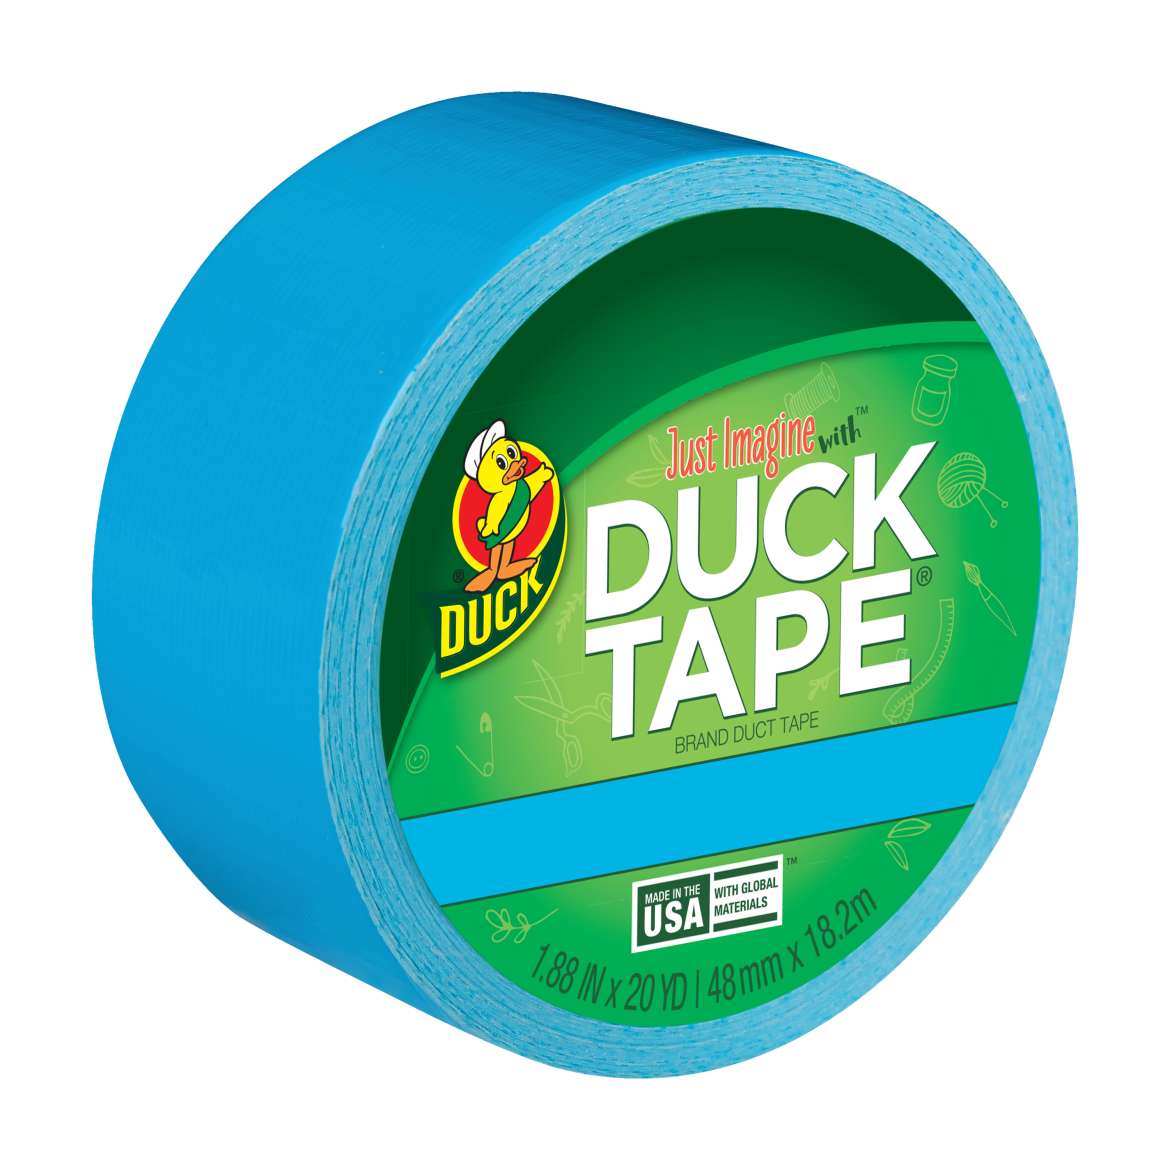 Color Duck Tape® Brand Duct Tape - Electric Blue, 1.88 in. x 20 yd.